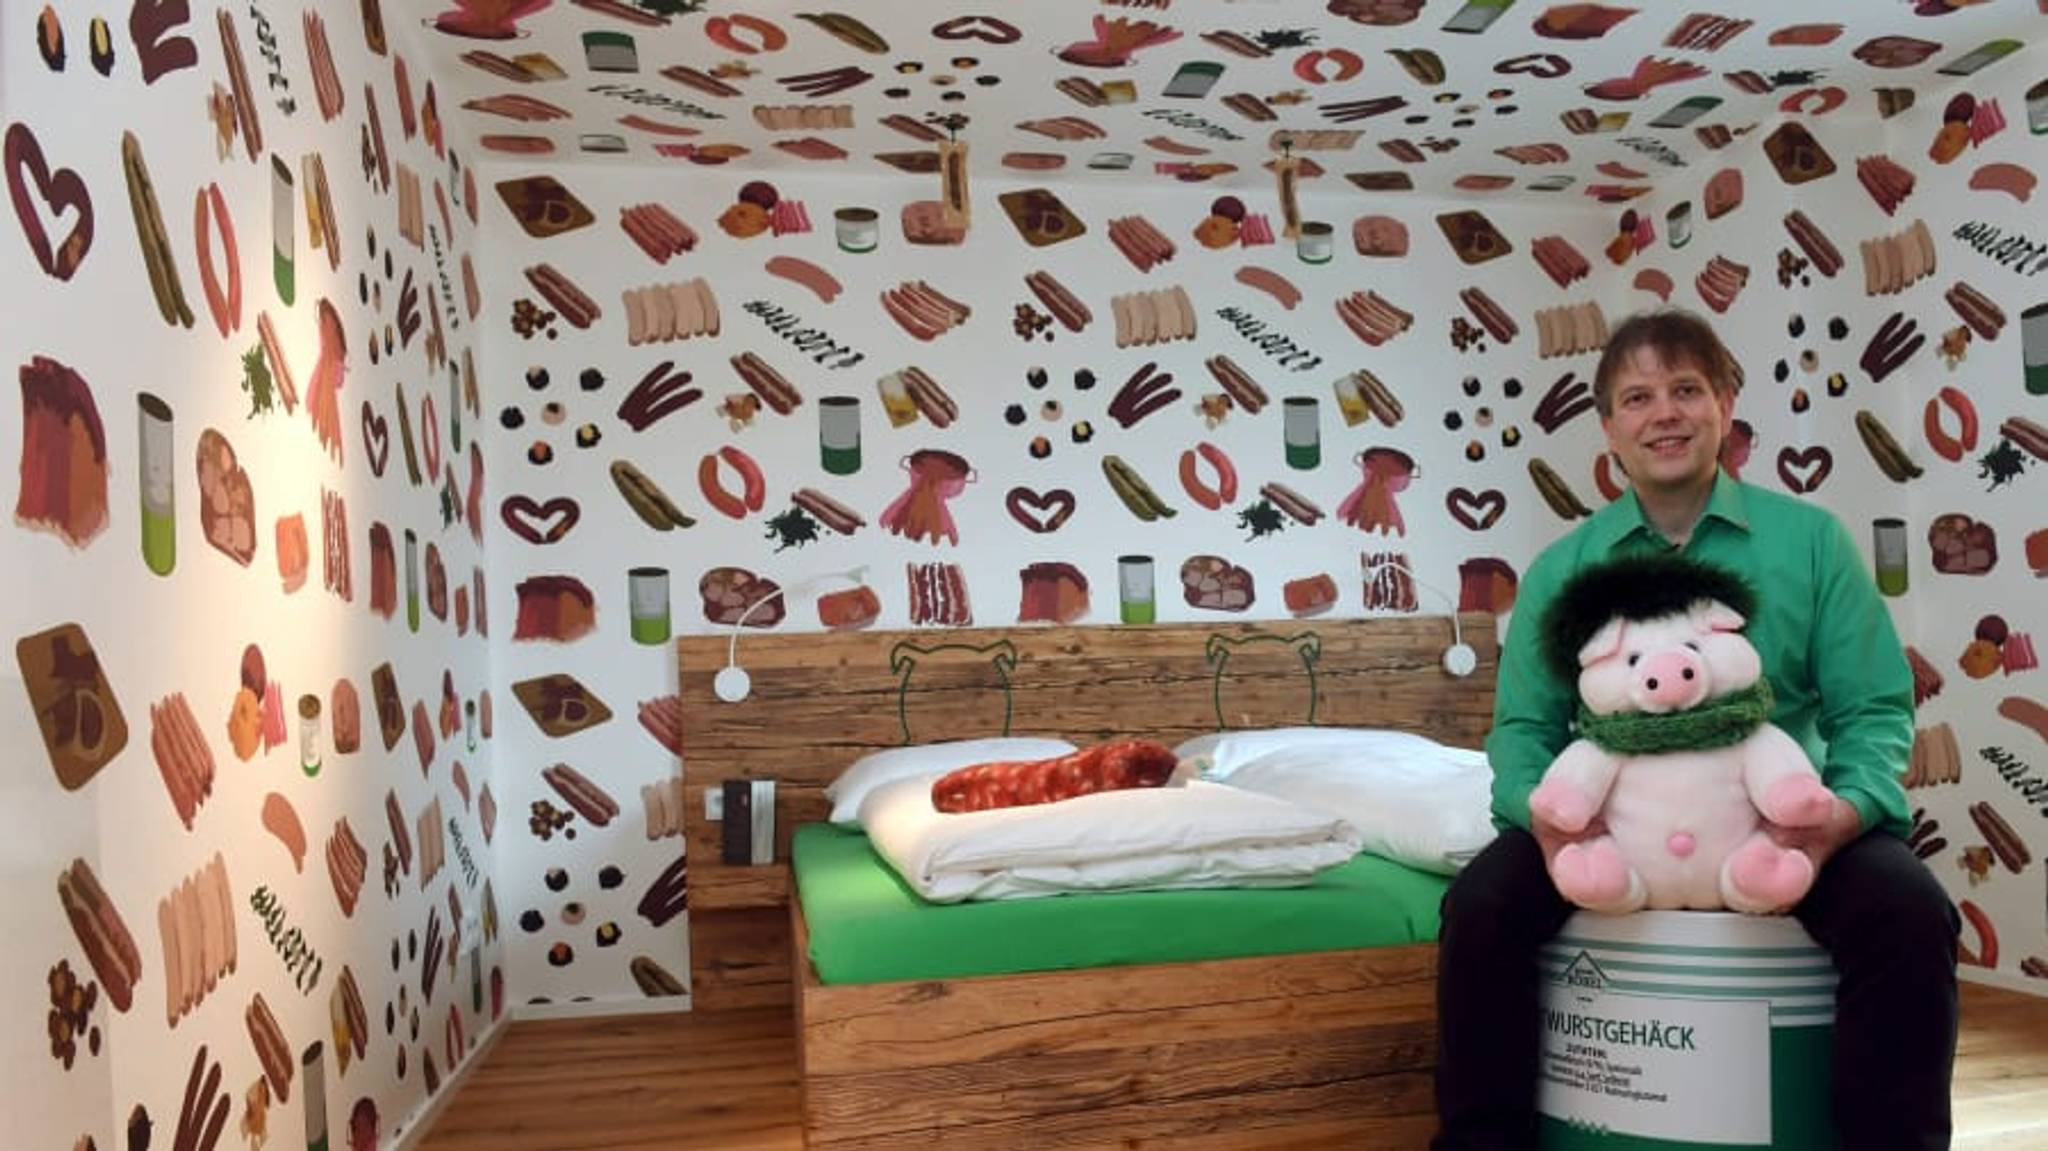 Sausage-themed hotel taps Gen Y's desire to show off